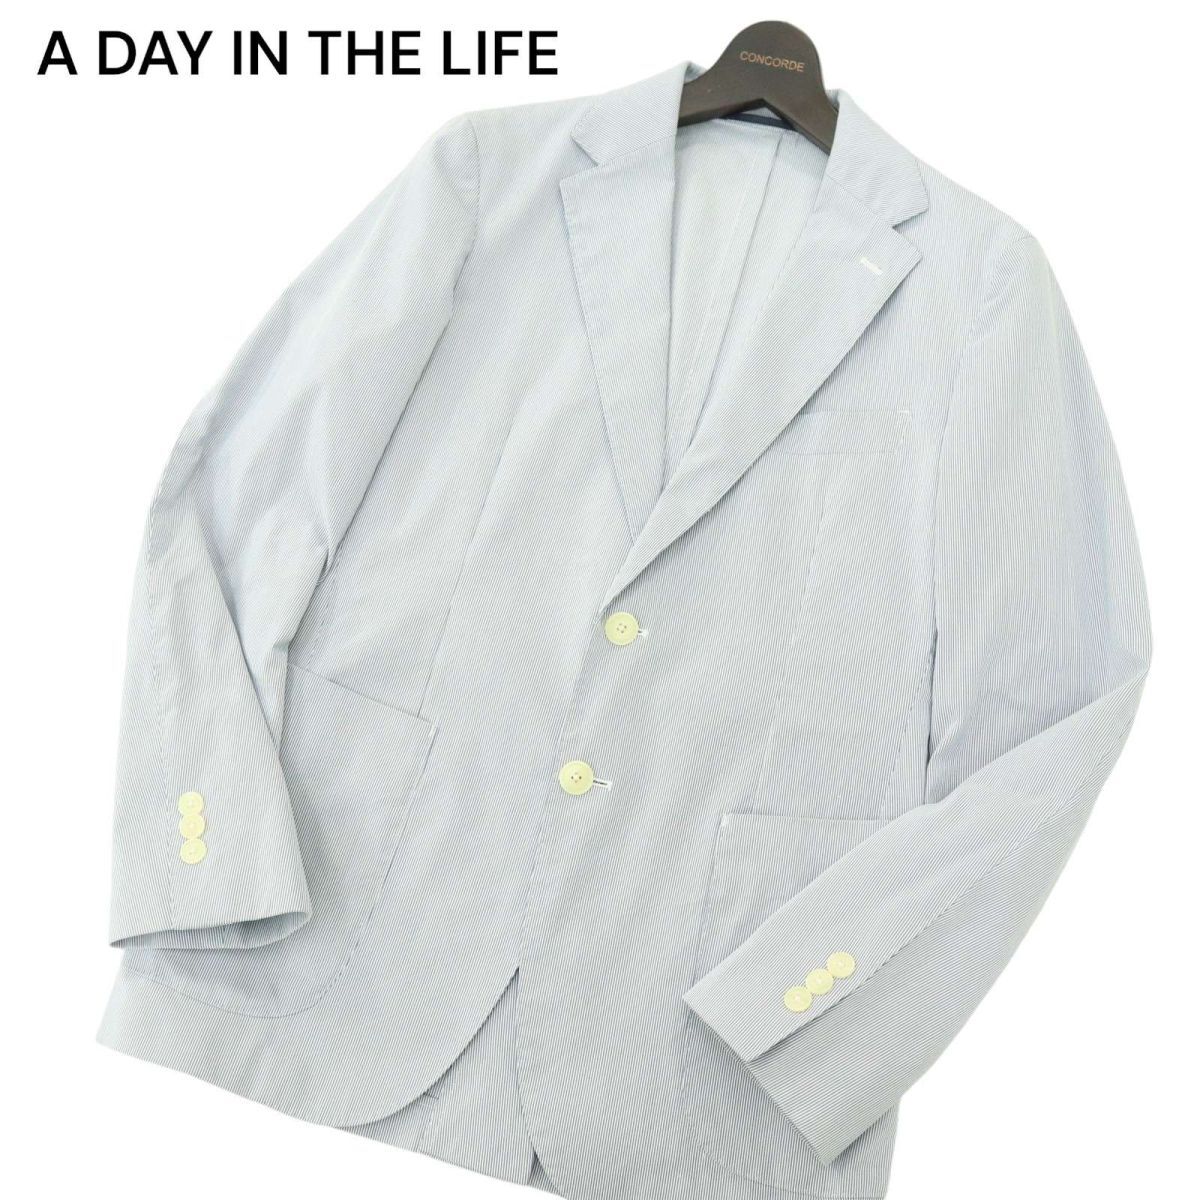 A DAY IN THE LIFE ユナイテッドアローズ 通年 ストライプ★ テーラード ジャケット ブレザー Sz.S　メンズ 紺 × 白　A4T04965_5#O_画像1